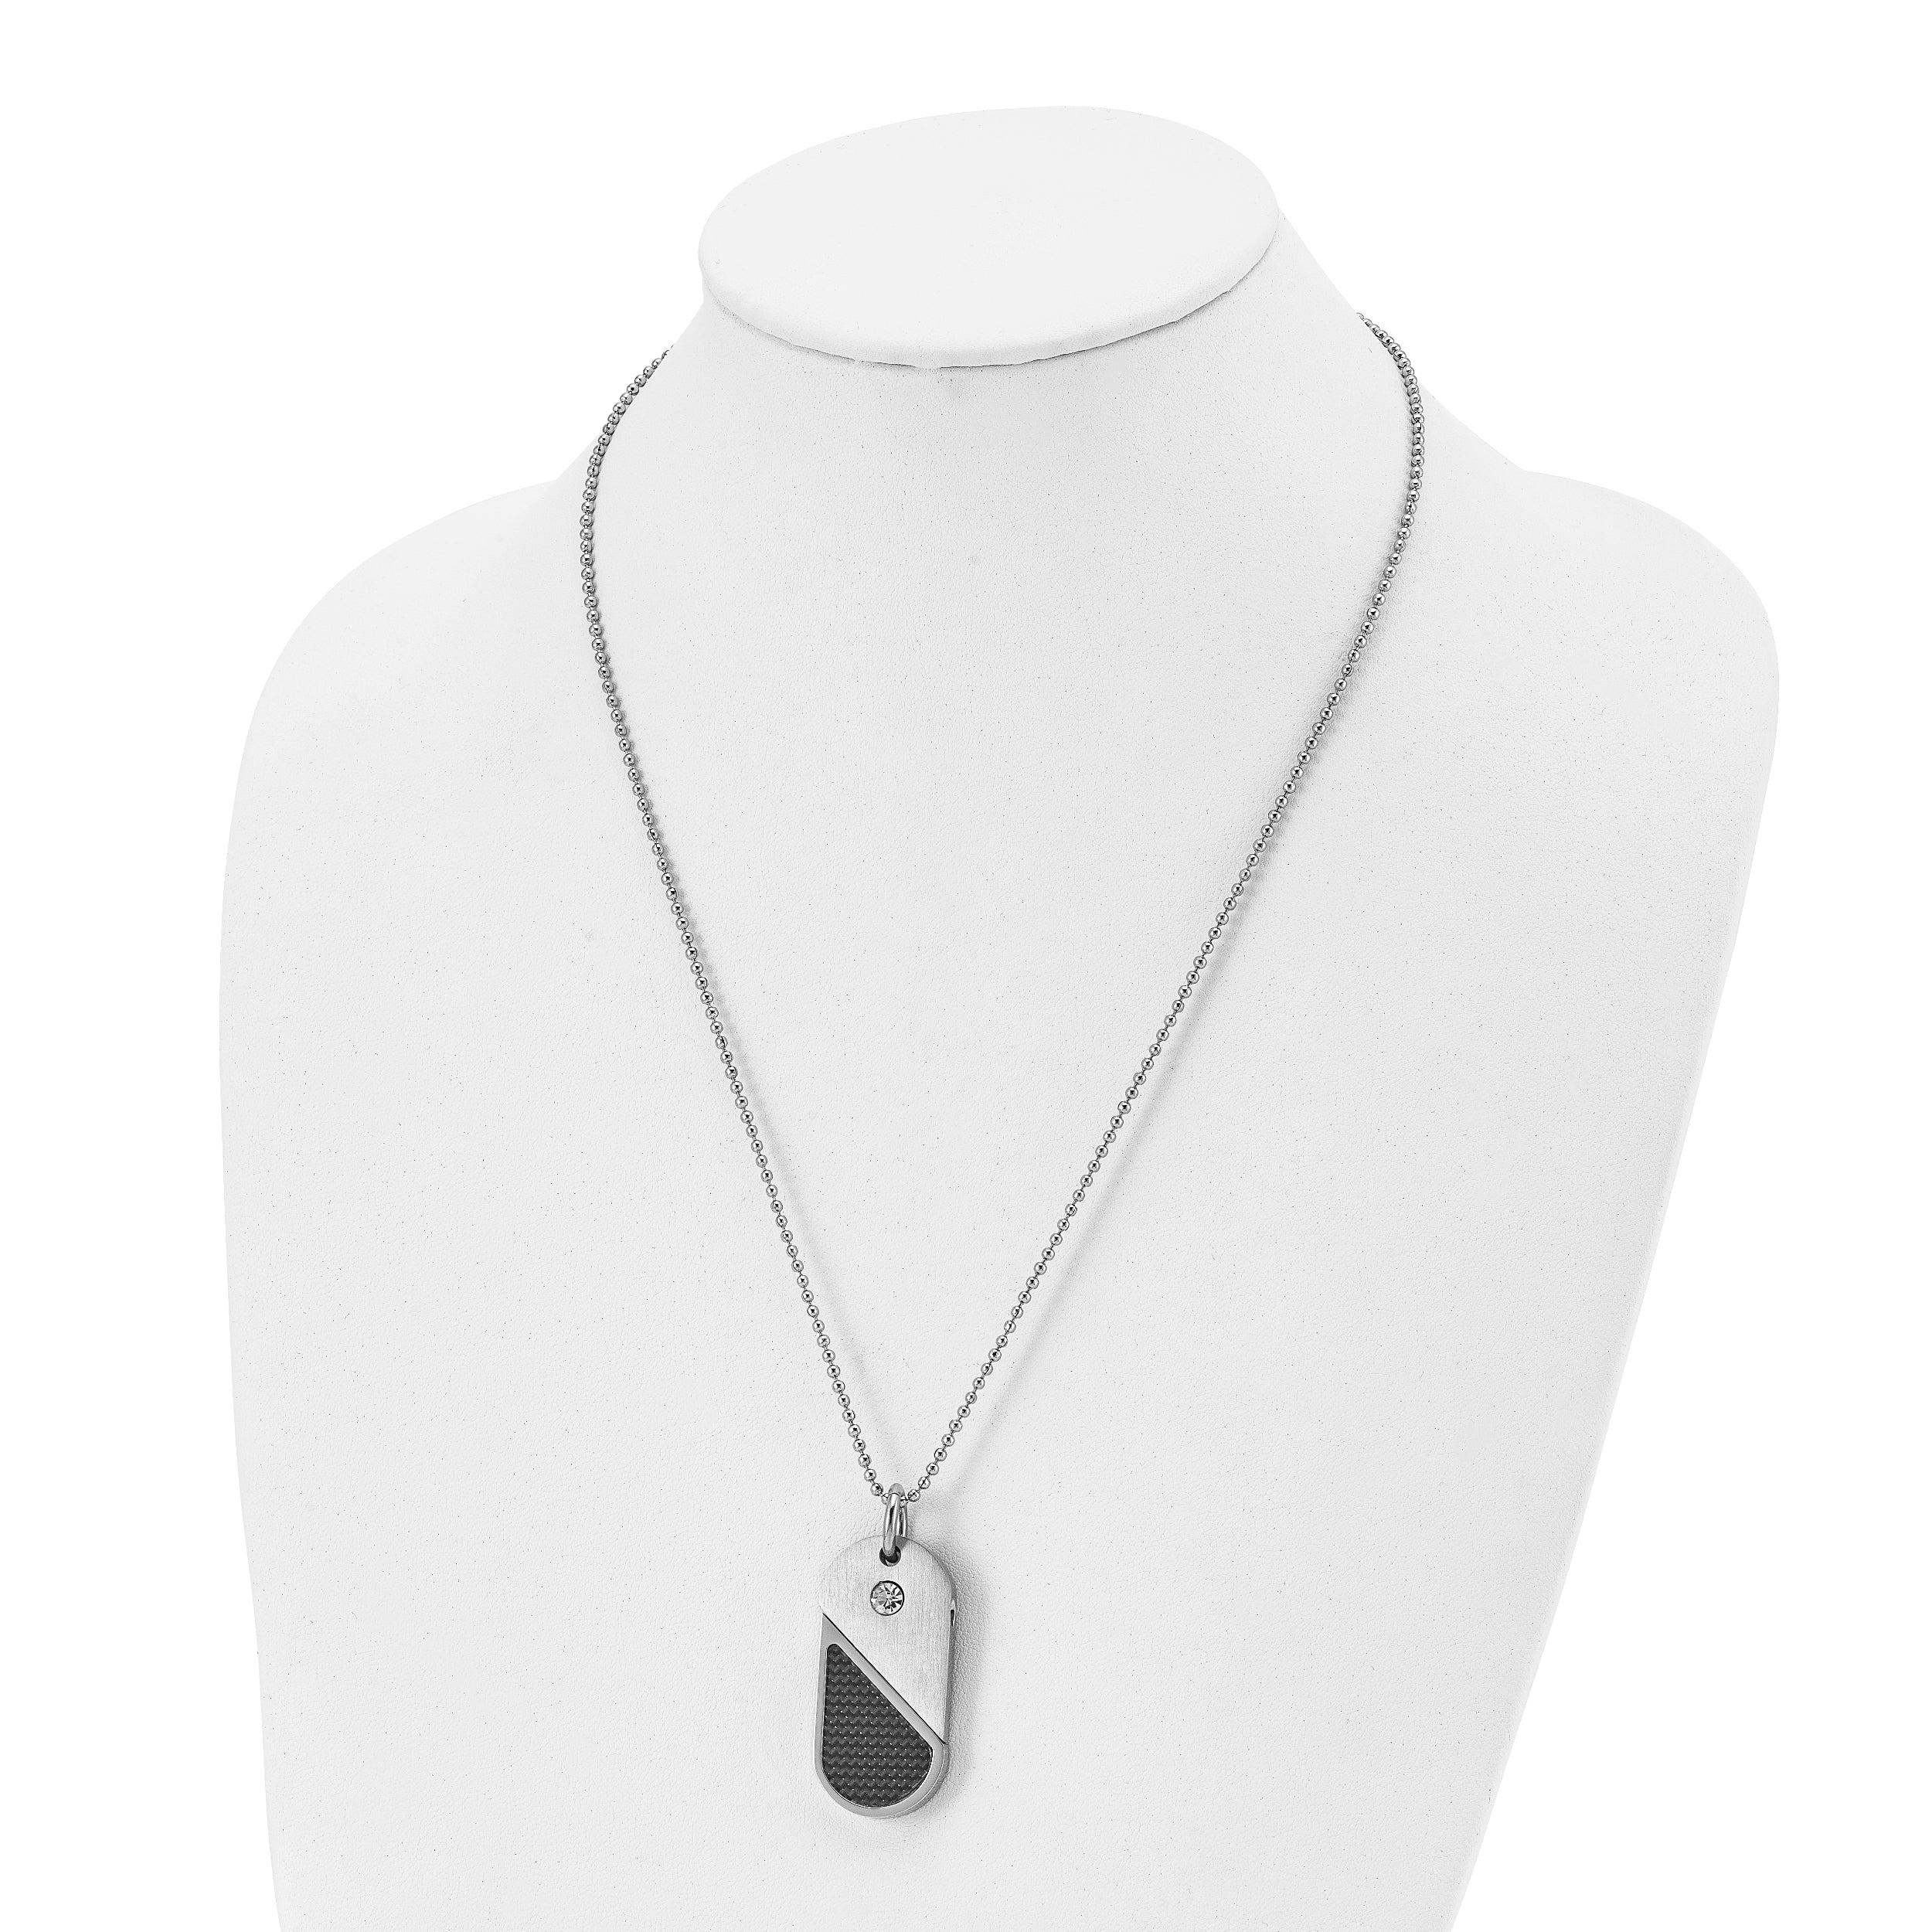 Chisel Stainless Steel Brushed and Polished with CZ and Carbon Fiber Inlay Movable DogTag/Heart Pendant on a 22 in Ball Chain Necklace